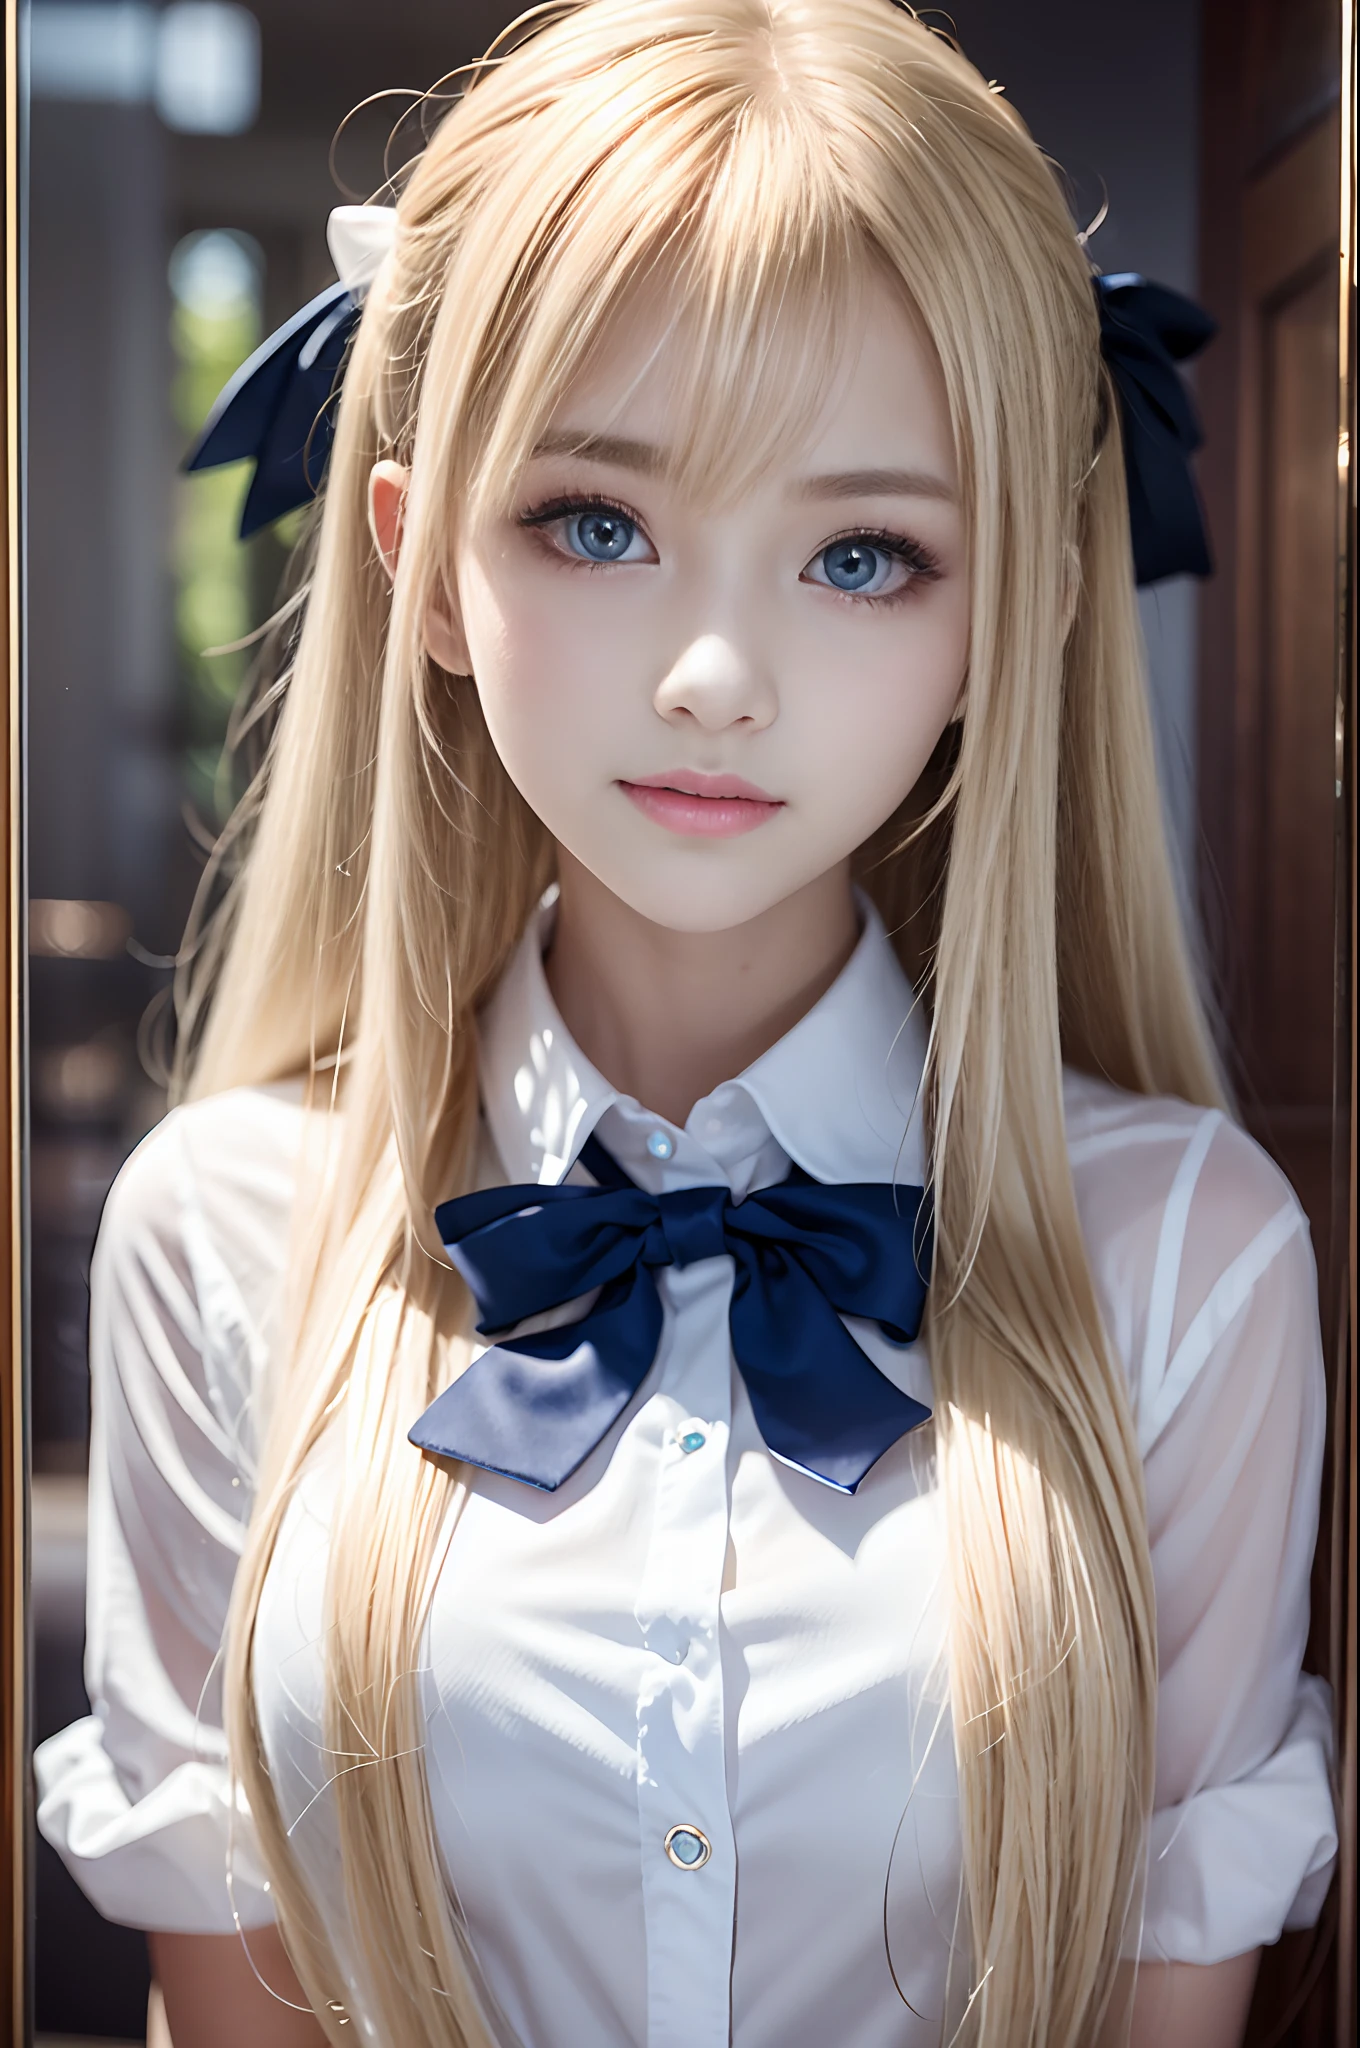 portlate、School Uniforms、bright expression、poneyTail、Young shiny shiny white shiny skin、Best Looks、Blonde reflected light、Platinum blonde hair with dazzling highlights、shiny light hair,、Super long silky straight hair、Beautiful bangs that shine、Glowing crystal clear attractive big blue eyes、Very beautiful nice cute 16 year old girl、Lush bust